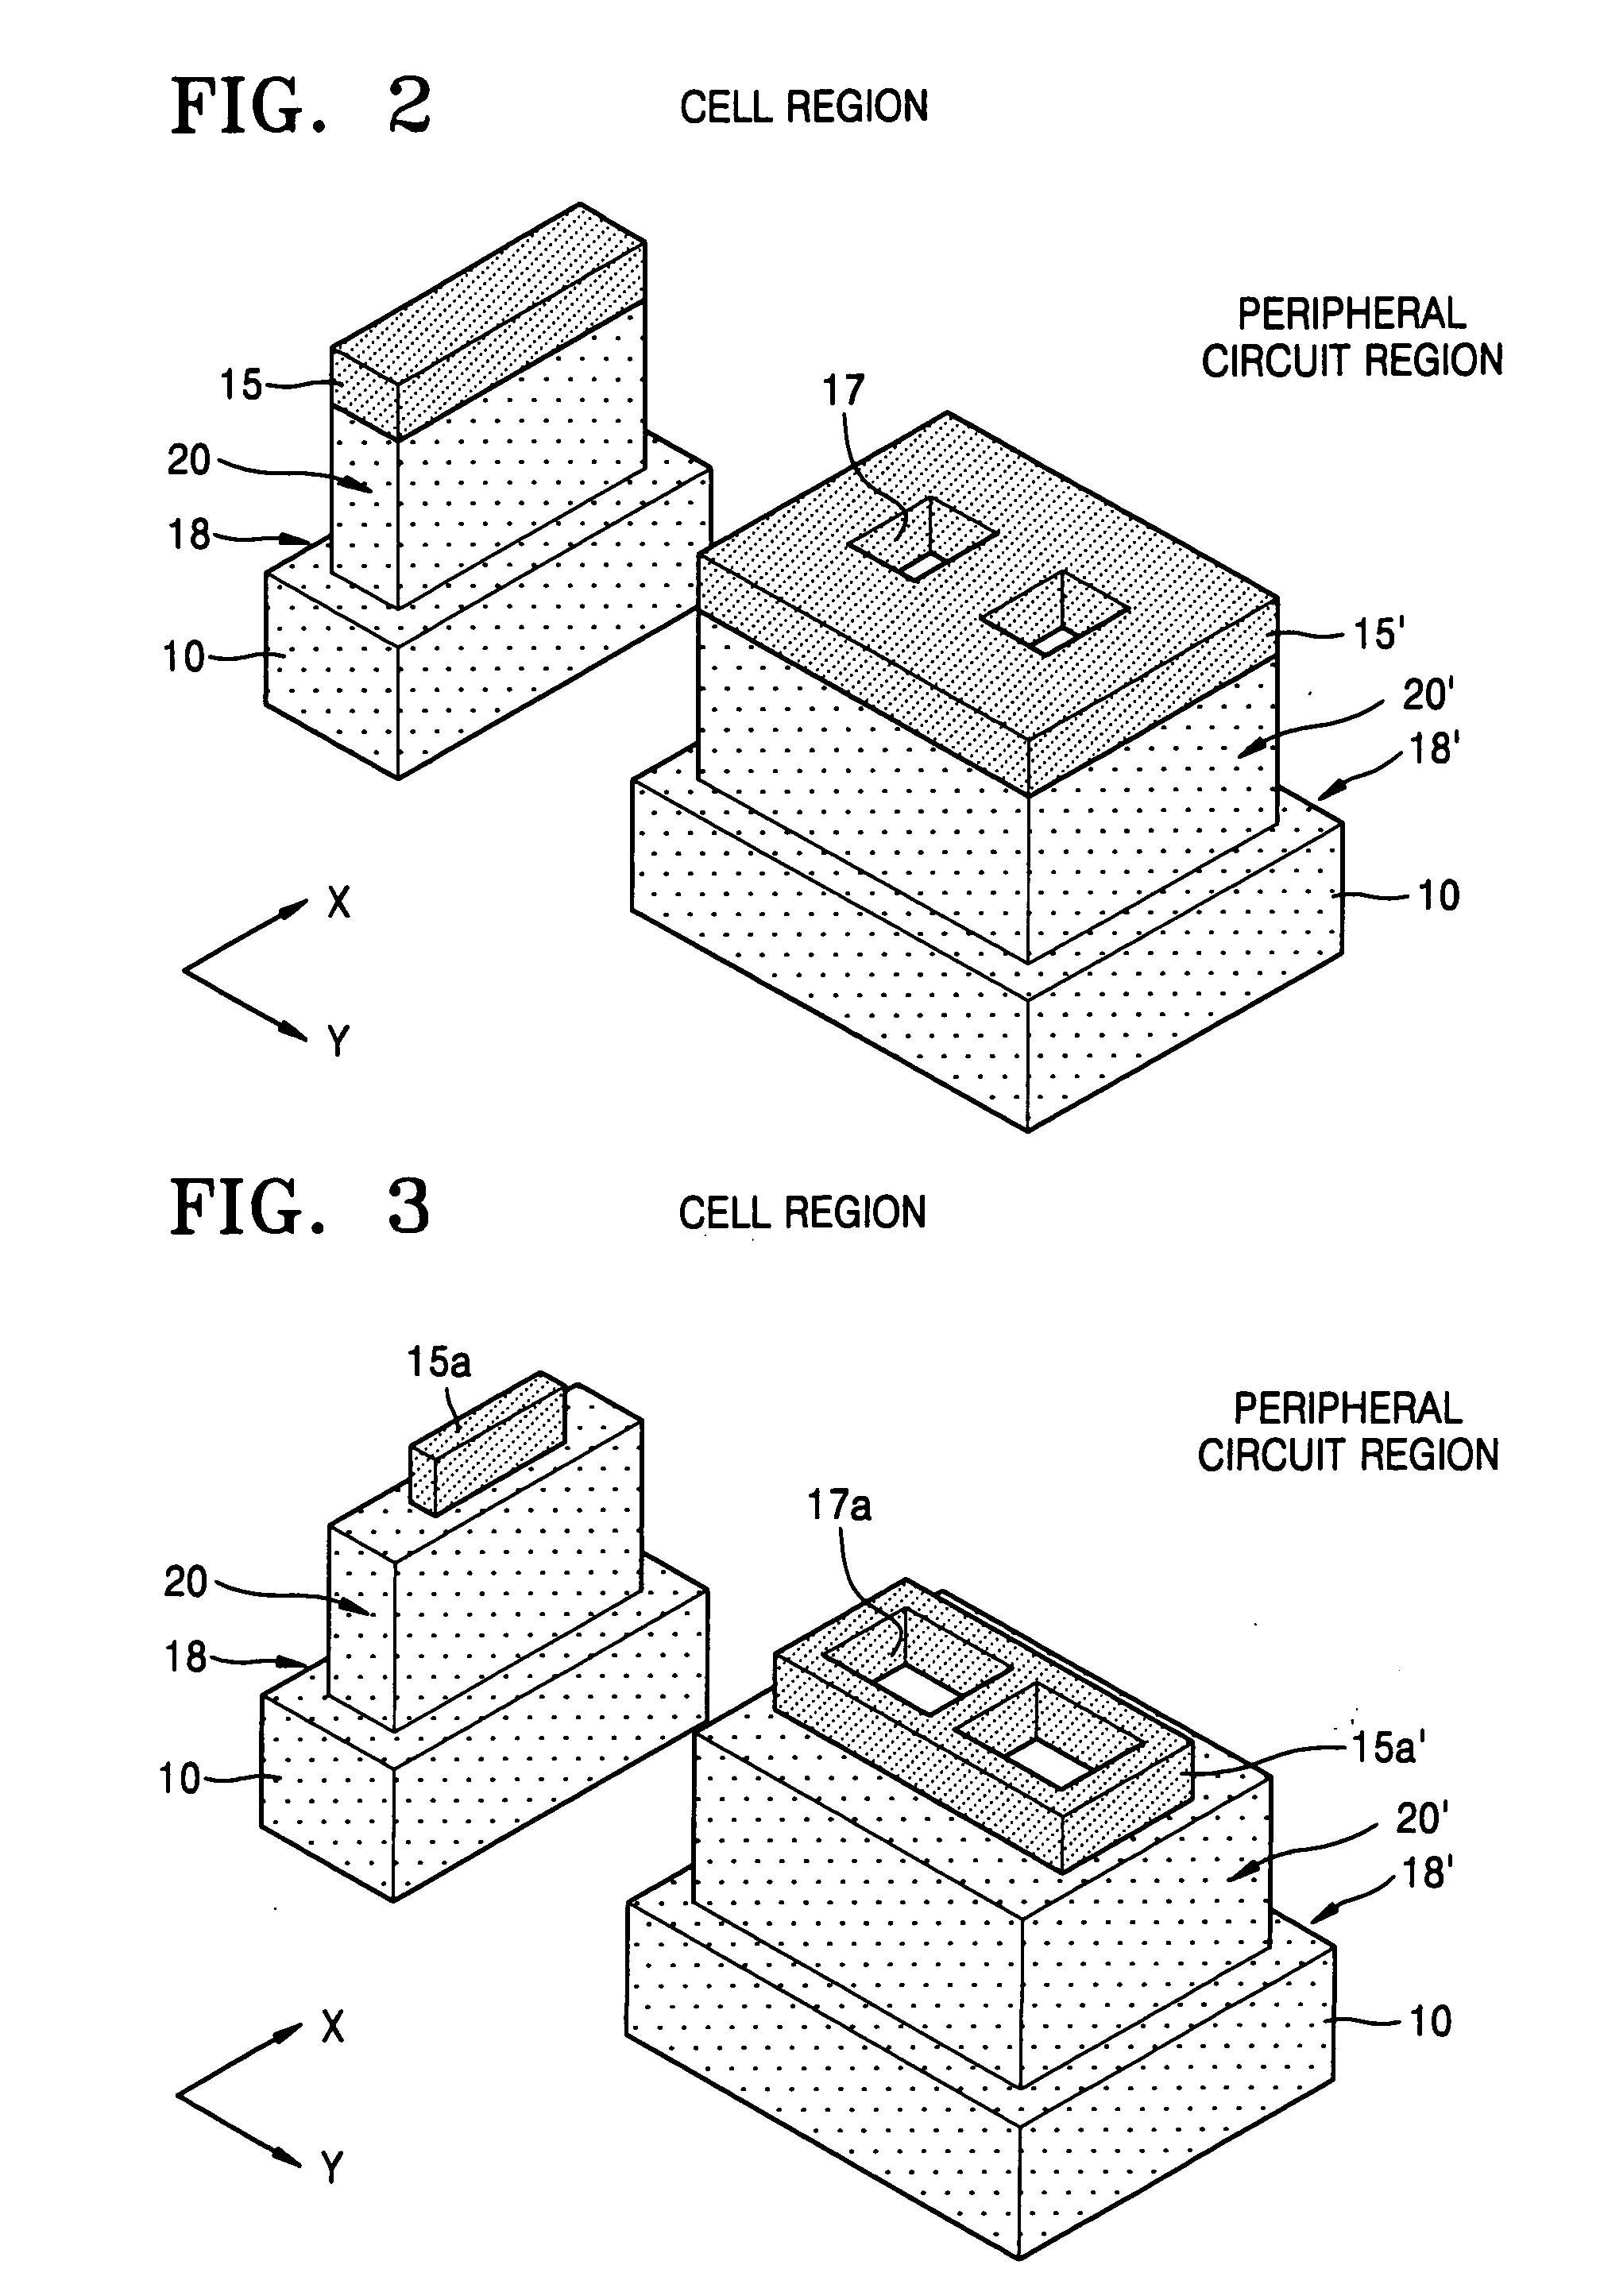 Semiconductor device including a multi-channel fin field effect transistor and method of fabricating the same